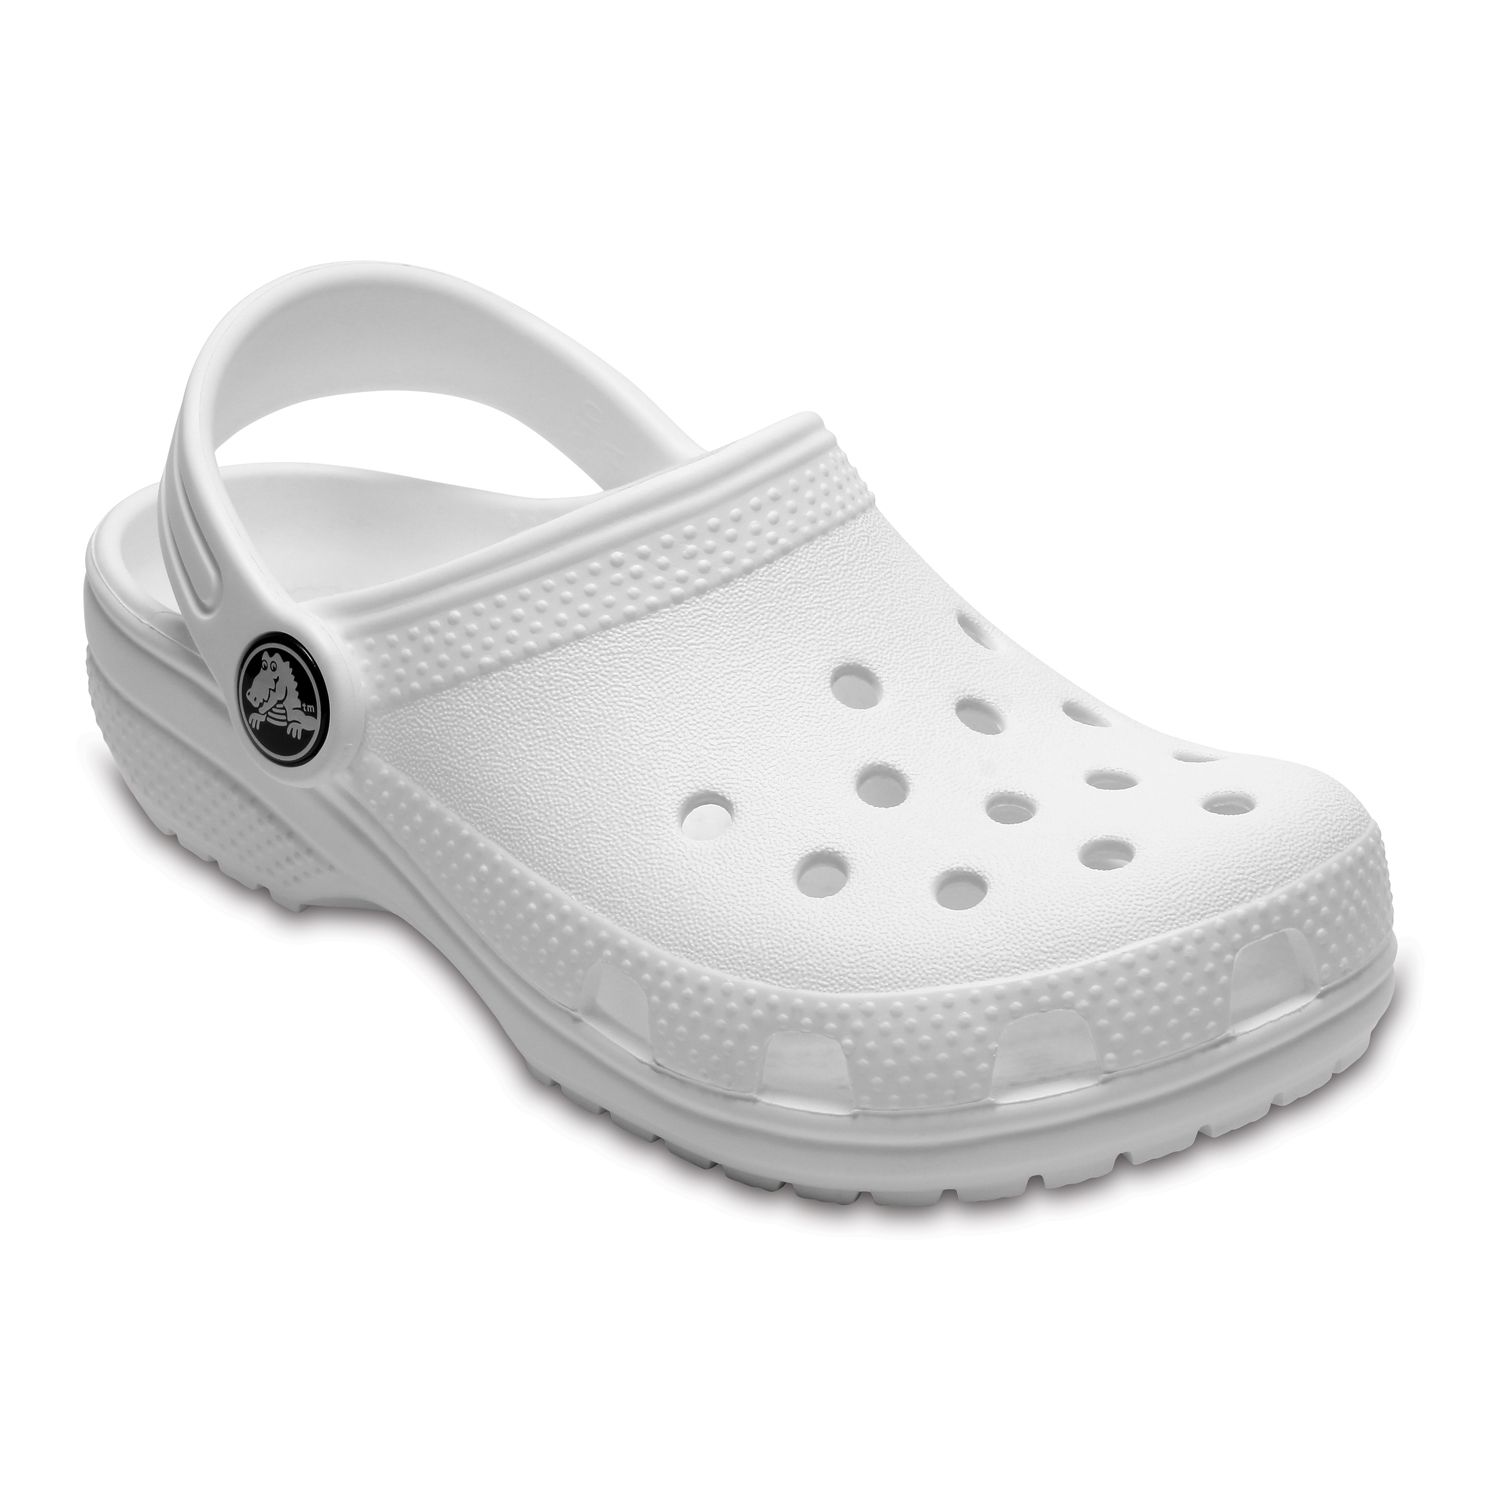 crocs size for 8 year old